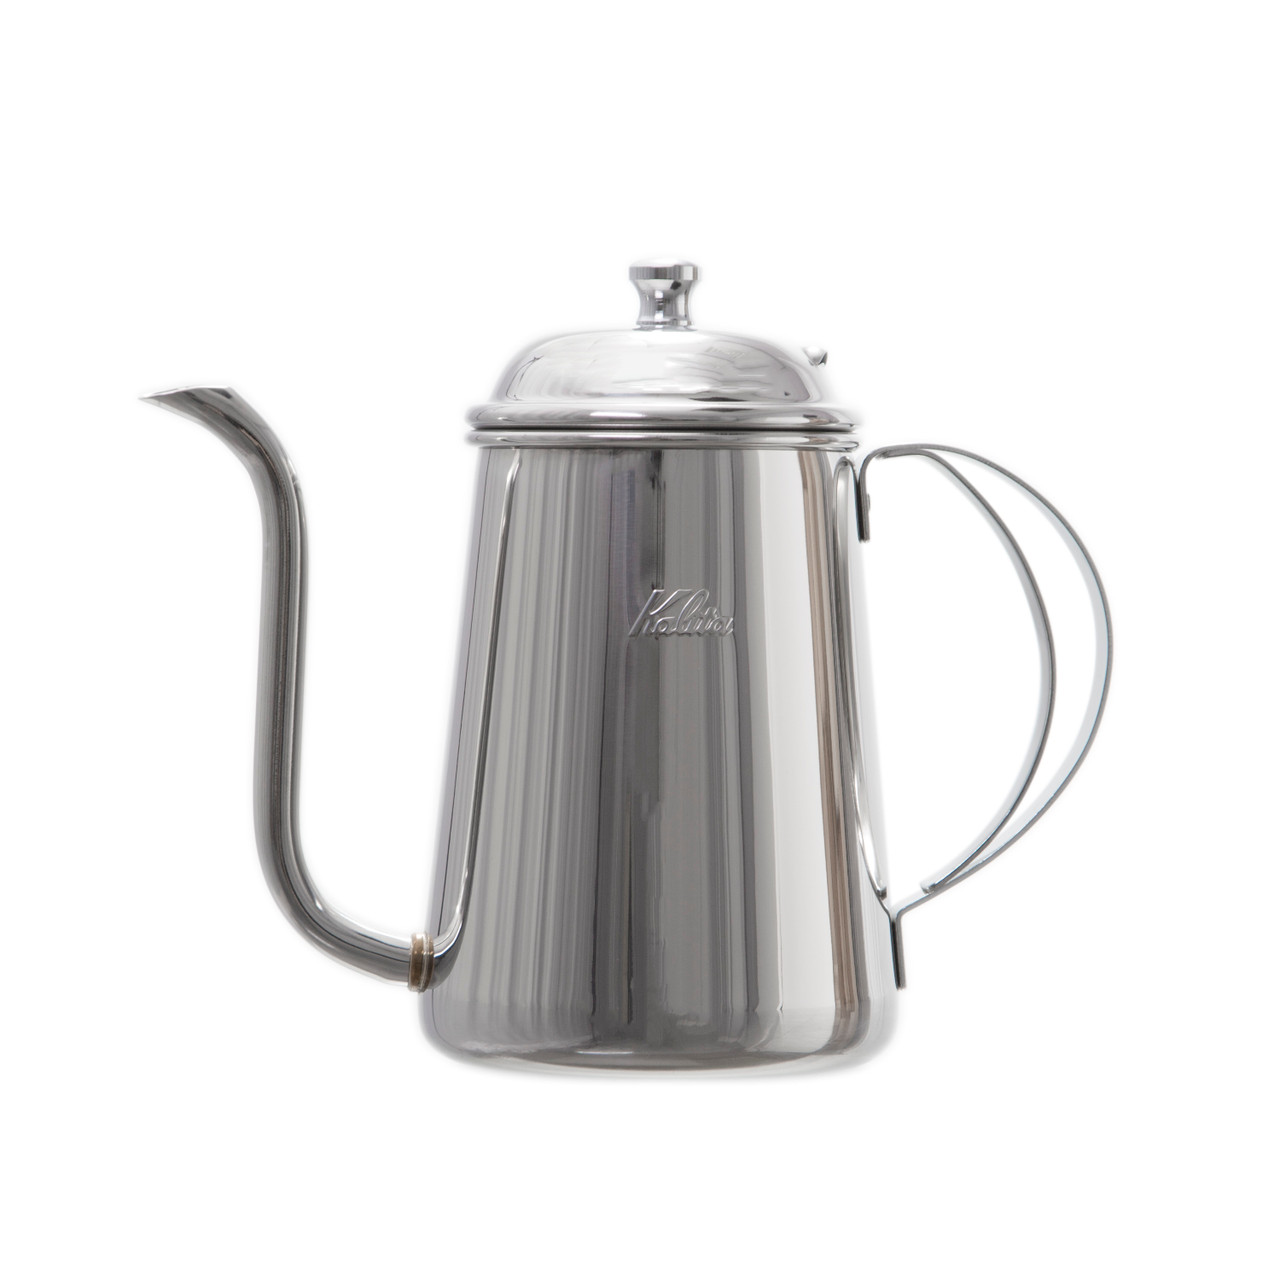 https://cdn11.bigcommerce.com/s-6h7ychjk4/products/7747/images/87654/kalita-thin-spout-kettle-side1__04538.1597177308.1280.1280.jpg?c=1